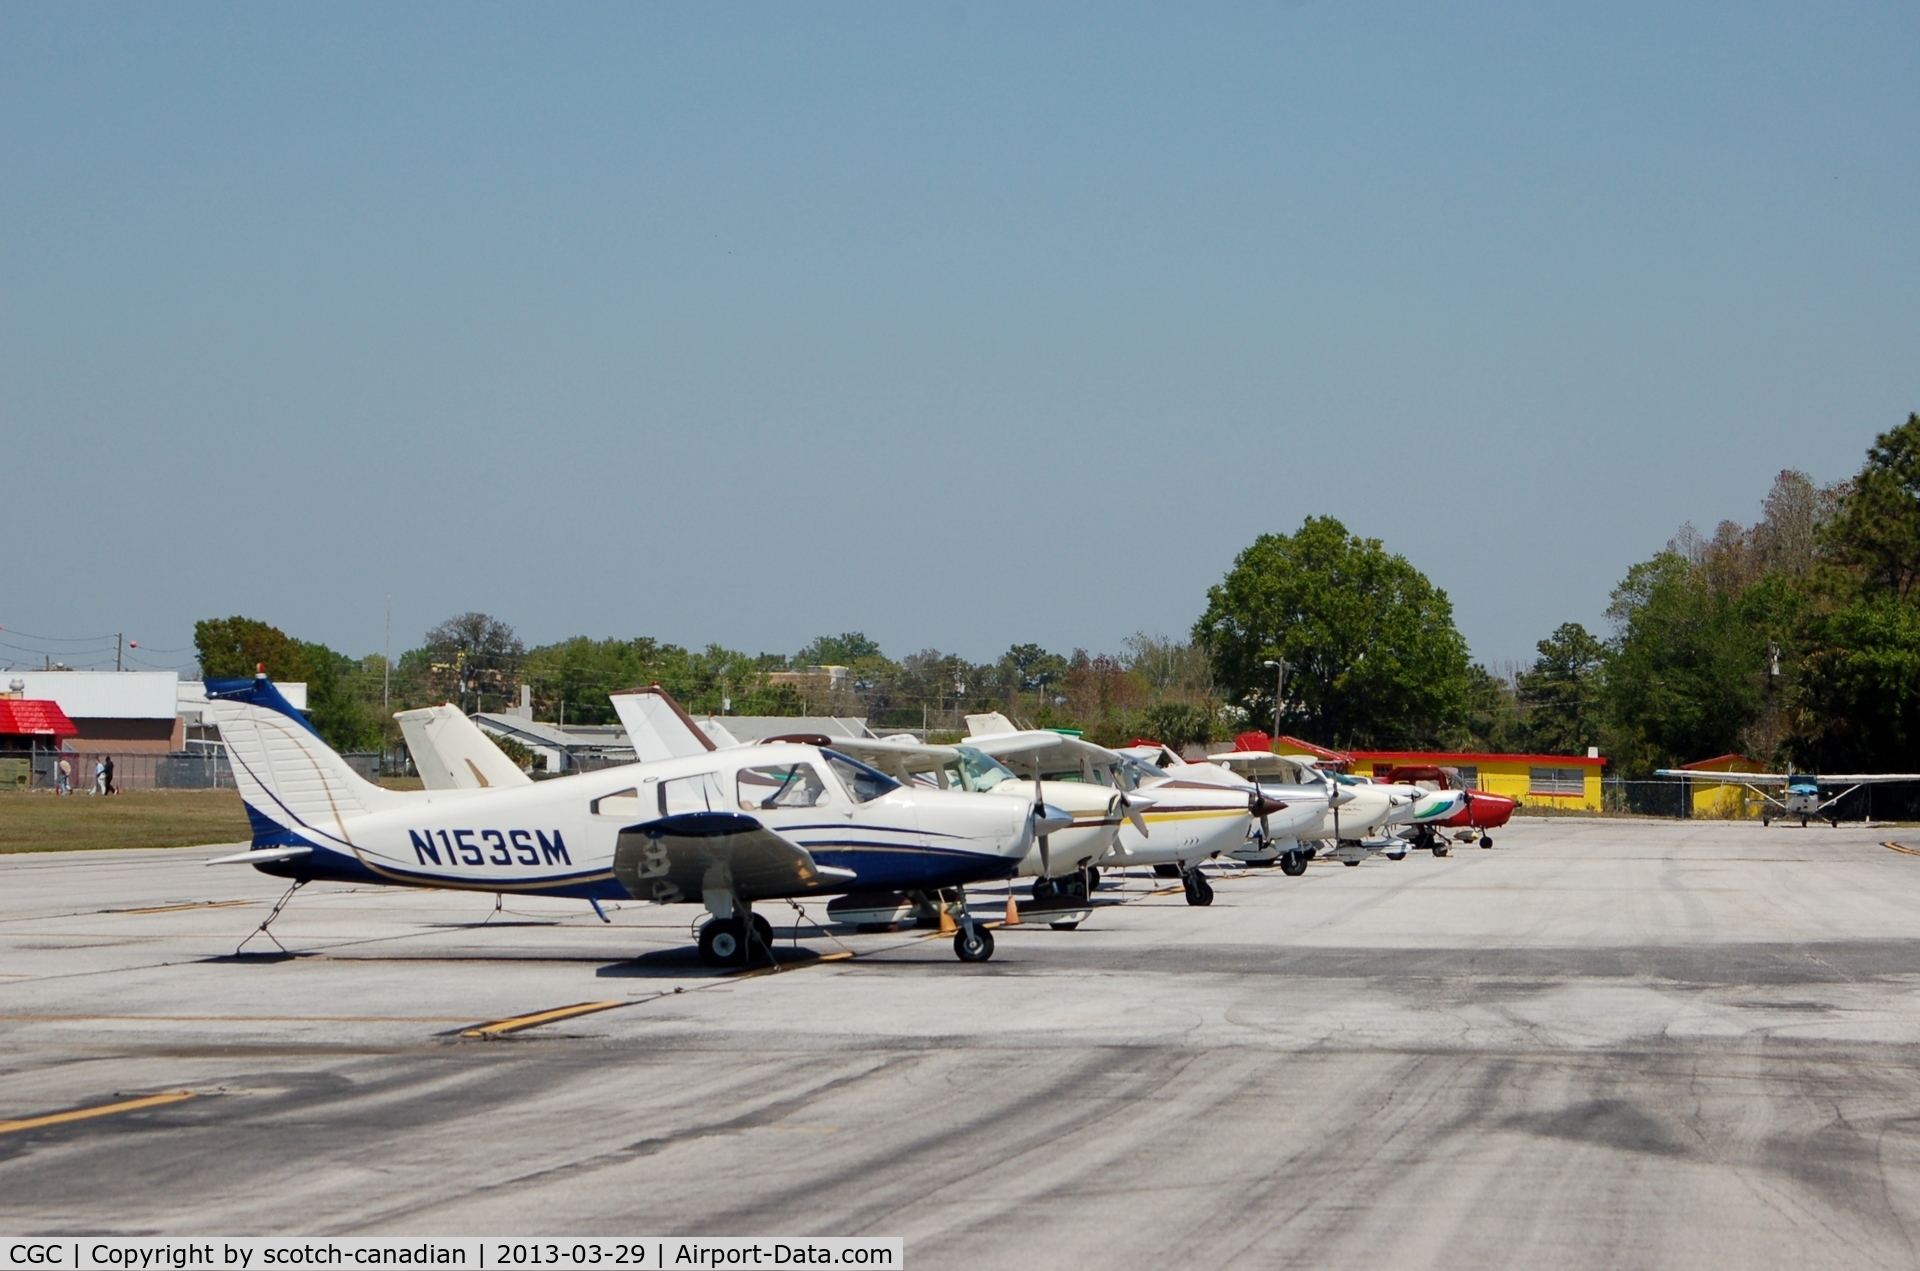 Crystal River Airport (CGC) - Flight Line at Crystal River Airport, Crystal River, FL 